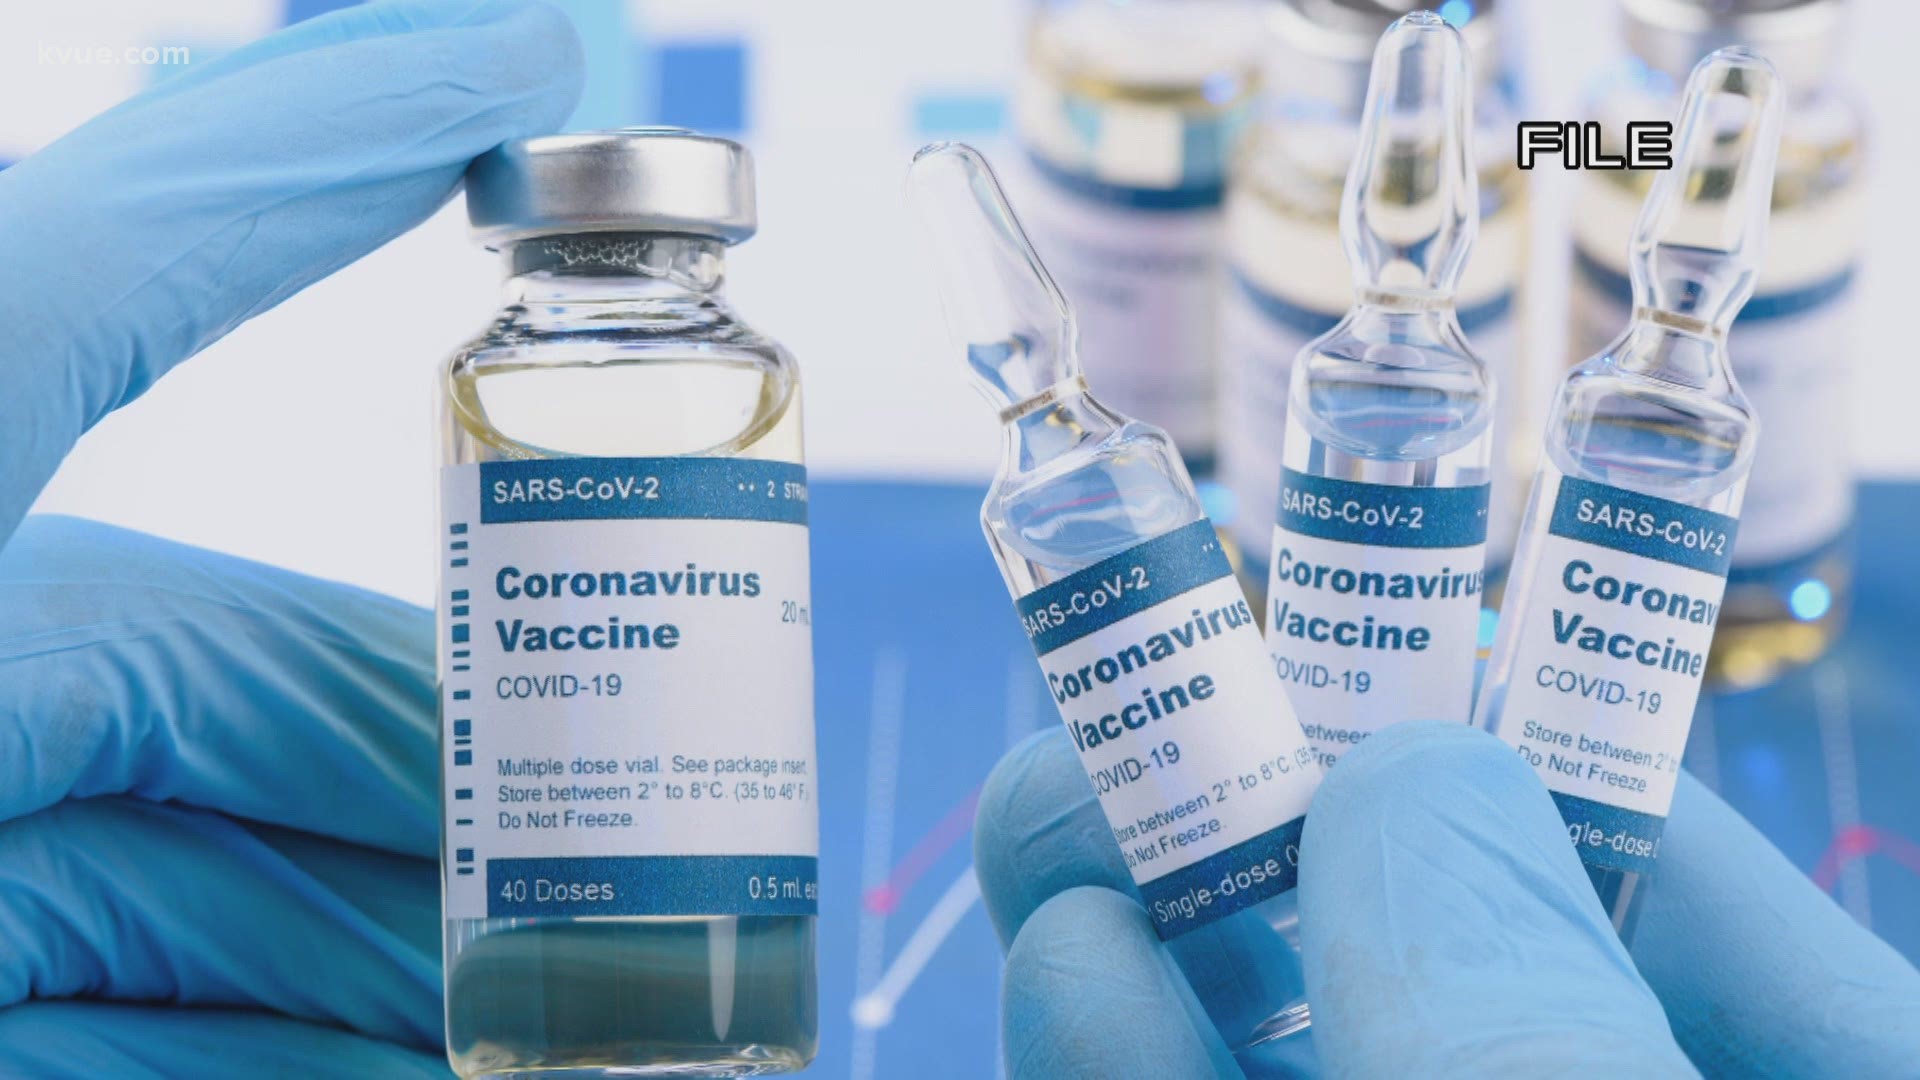 The CEO of Austin-based Benchmark Research says he is optimistic a coronavirus vaccine could soon go to the FDA for emergency authorization.